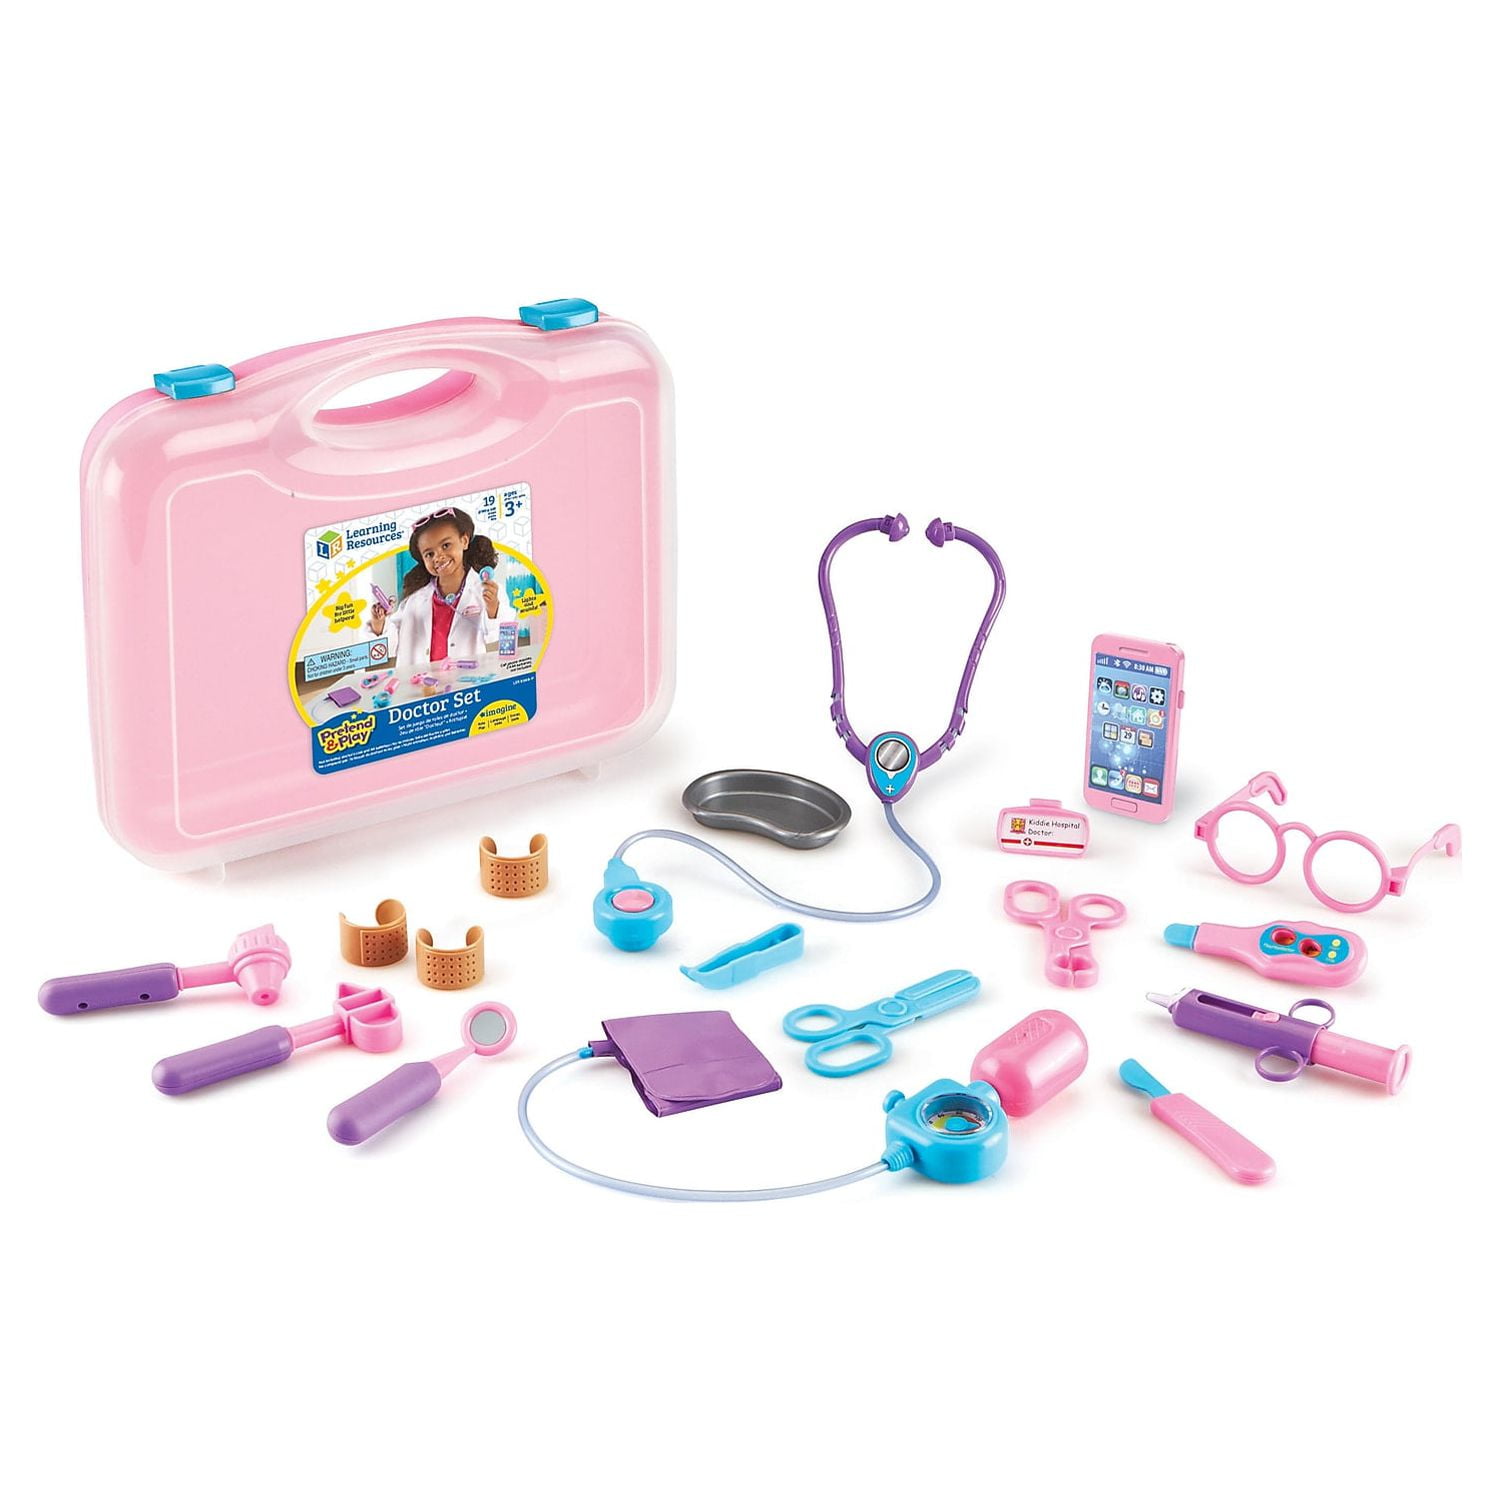 Learning Resources Pretend And Play Doctor Set 19 Pieces Pink 3fd5bd35 5d61 4977 9664 3c5c673f61ad.eed4abc70f73e8e66e5654d0545c34f0 